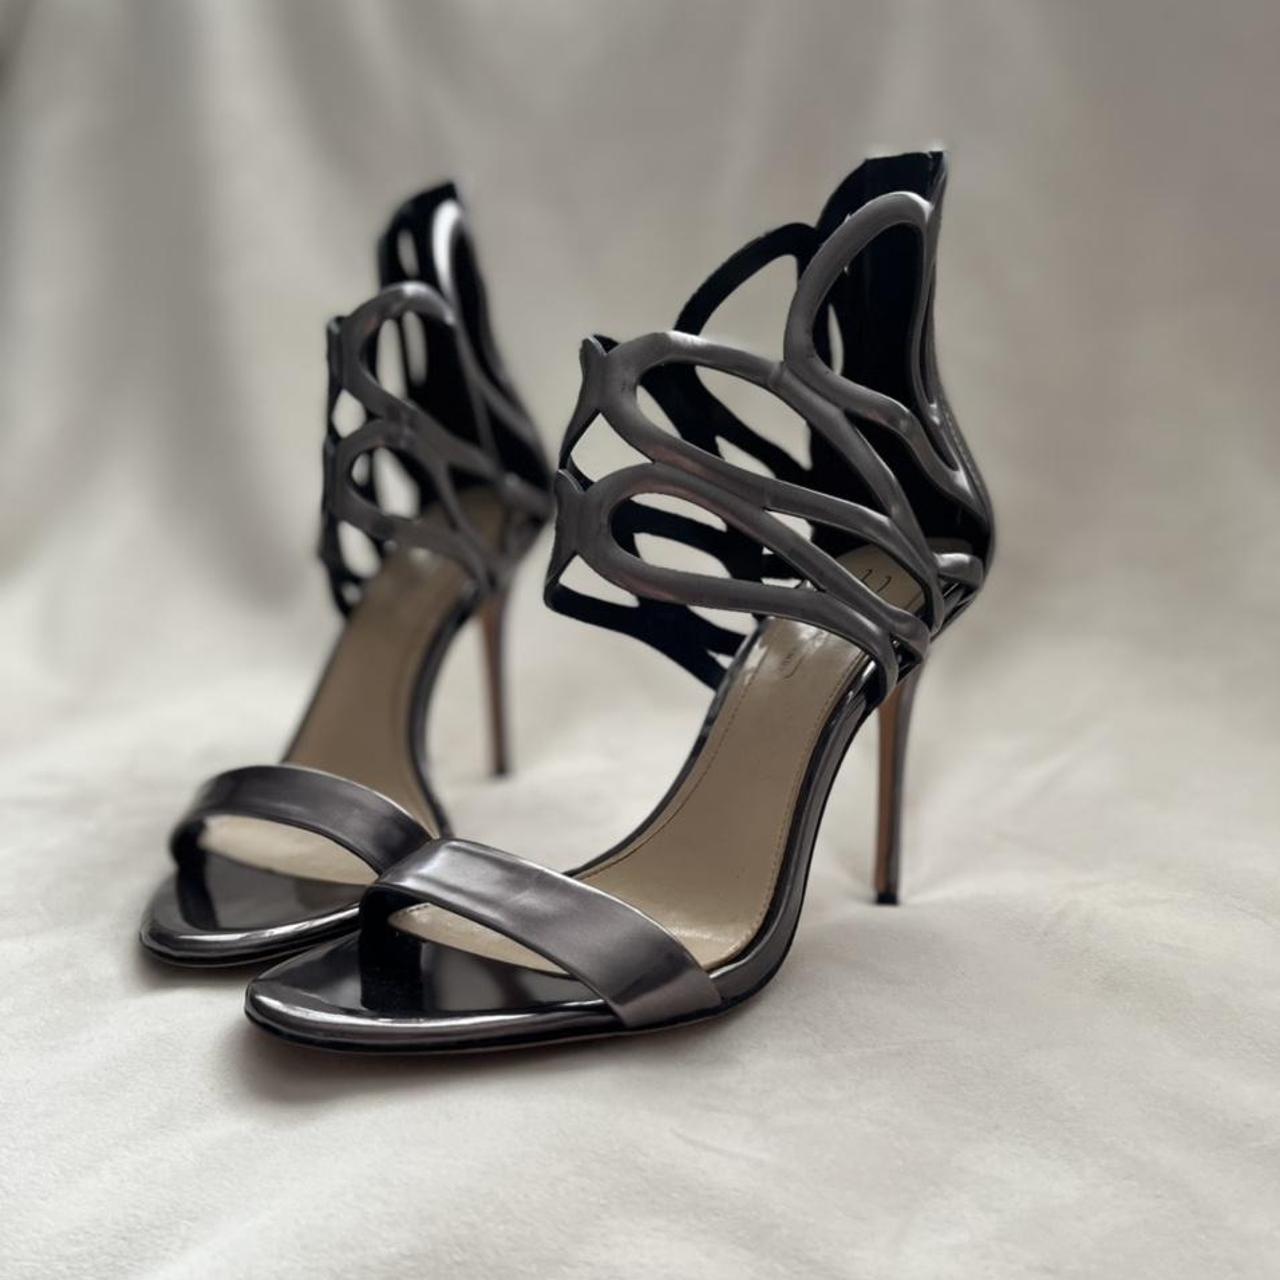 Vince Camuto Women's Silver Courts (2)